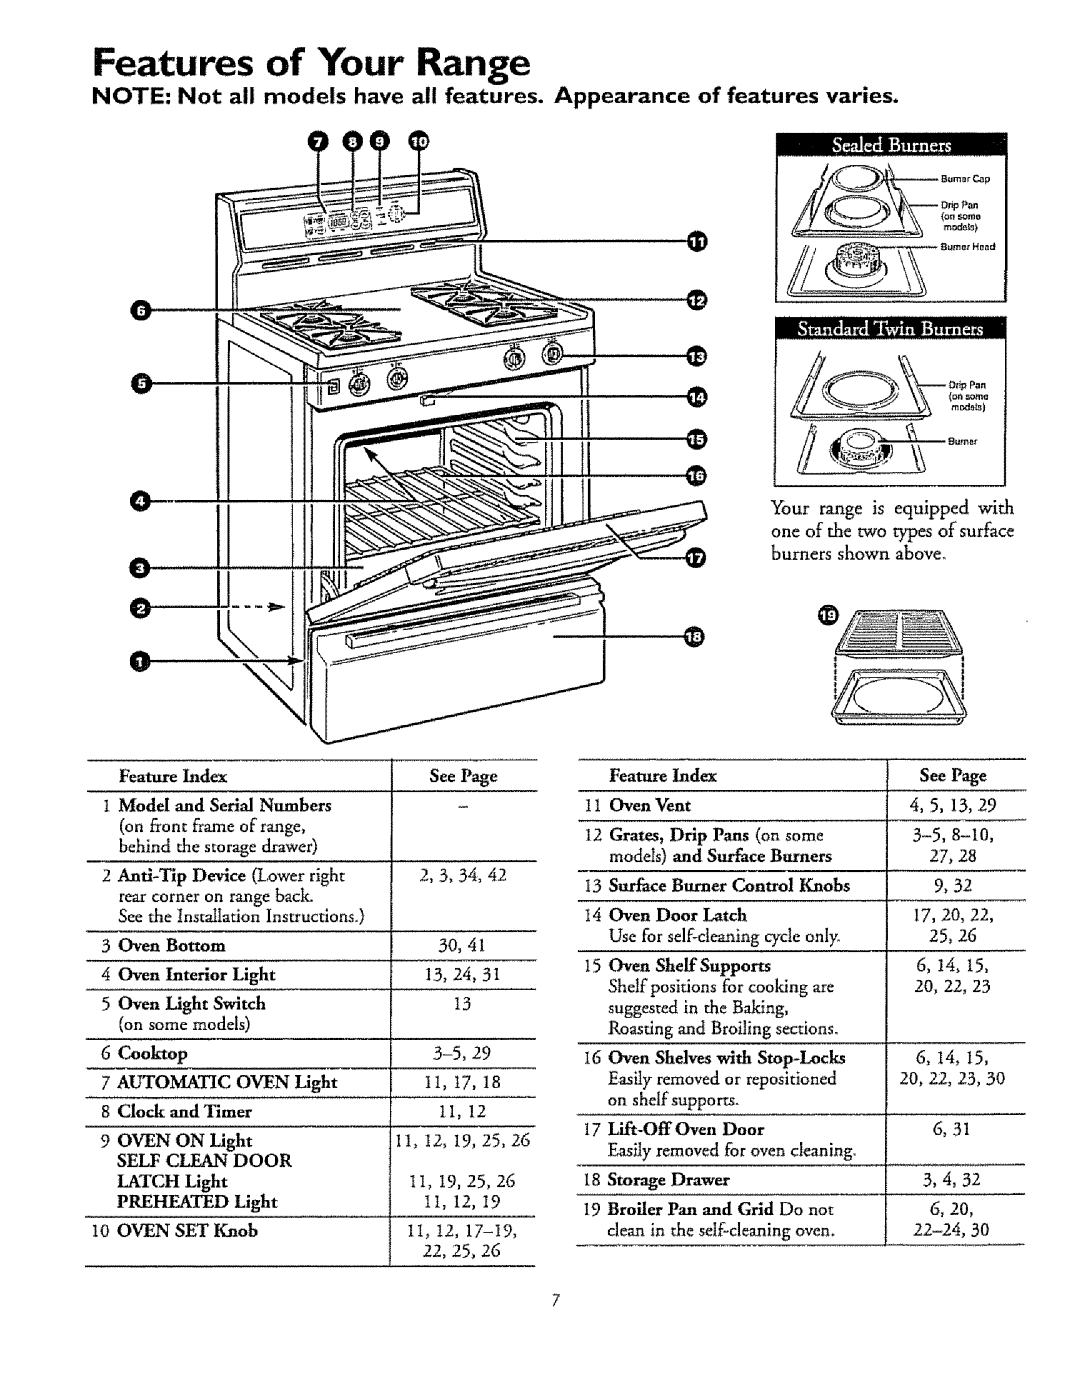 Sears 75378 Features of Your Range, 8.,.,Ho, Light Switch, andTimer, ON Light, Latch, Preheated, Page, Grates, Drip 